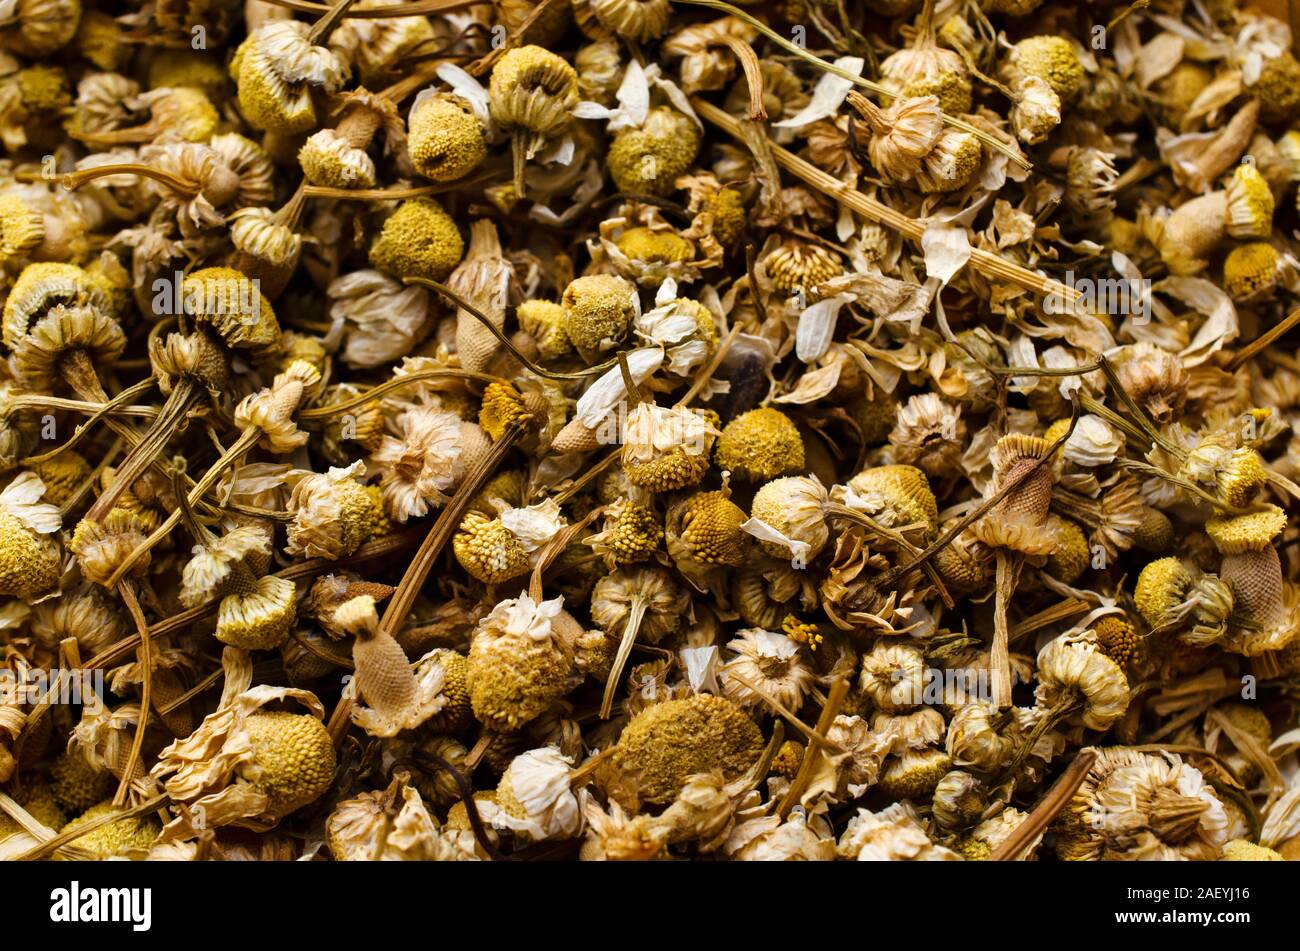 Dried yellow chamomile flowers with stems, collected together and photographed from above as a background image.. Stock Photo